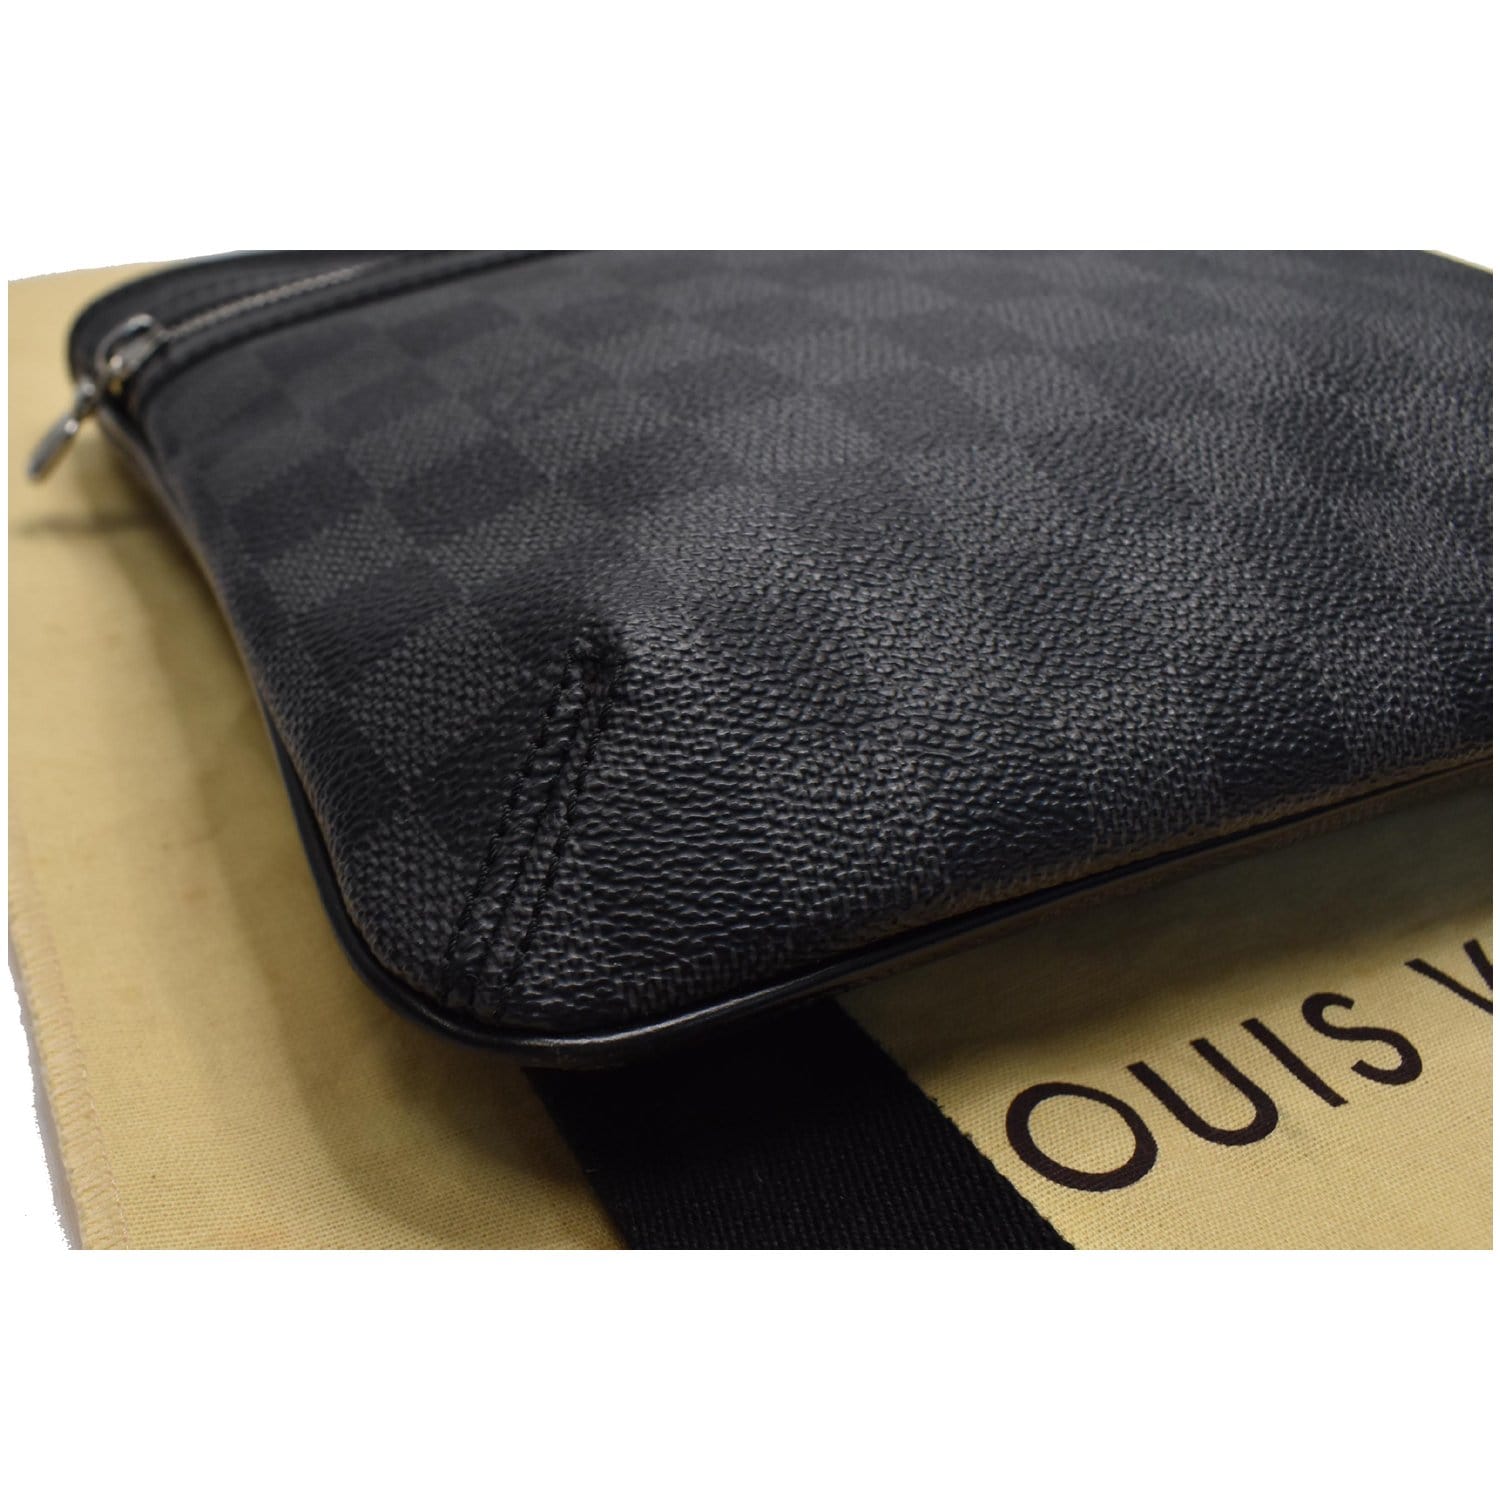 Very good LOUIS VUITTON Thomas Crossbody Bag in Damier Graphite 2012  (26x24cm), with dustbag. IDR @8.900.000 m